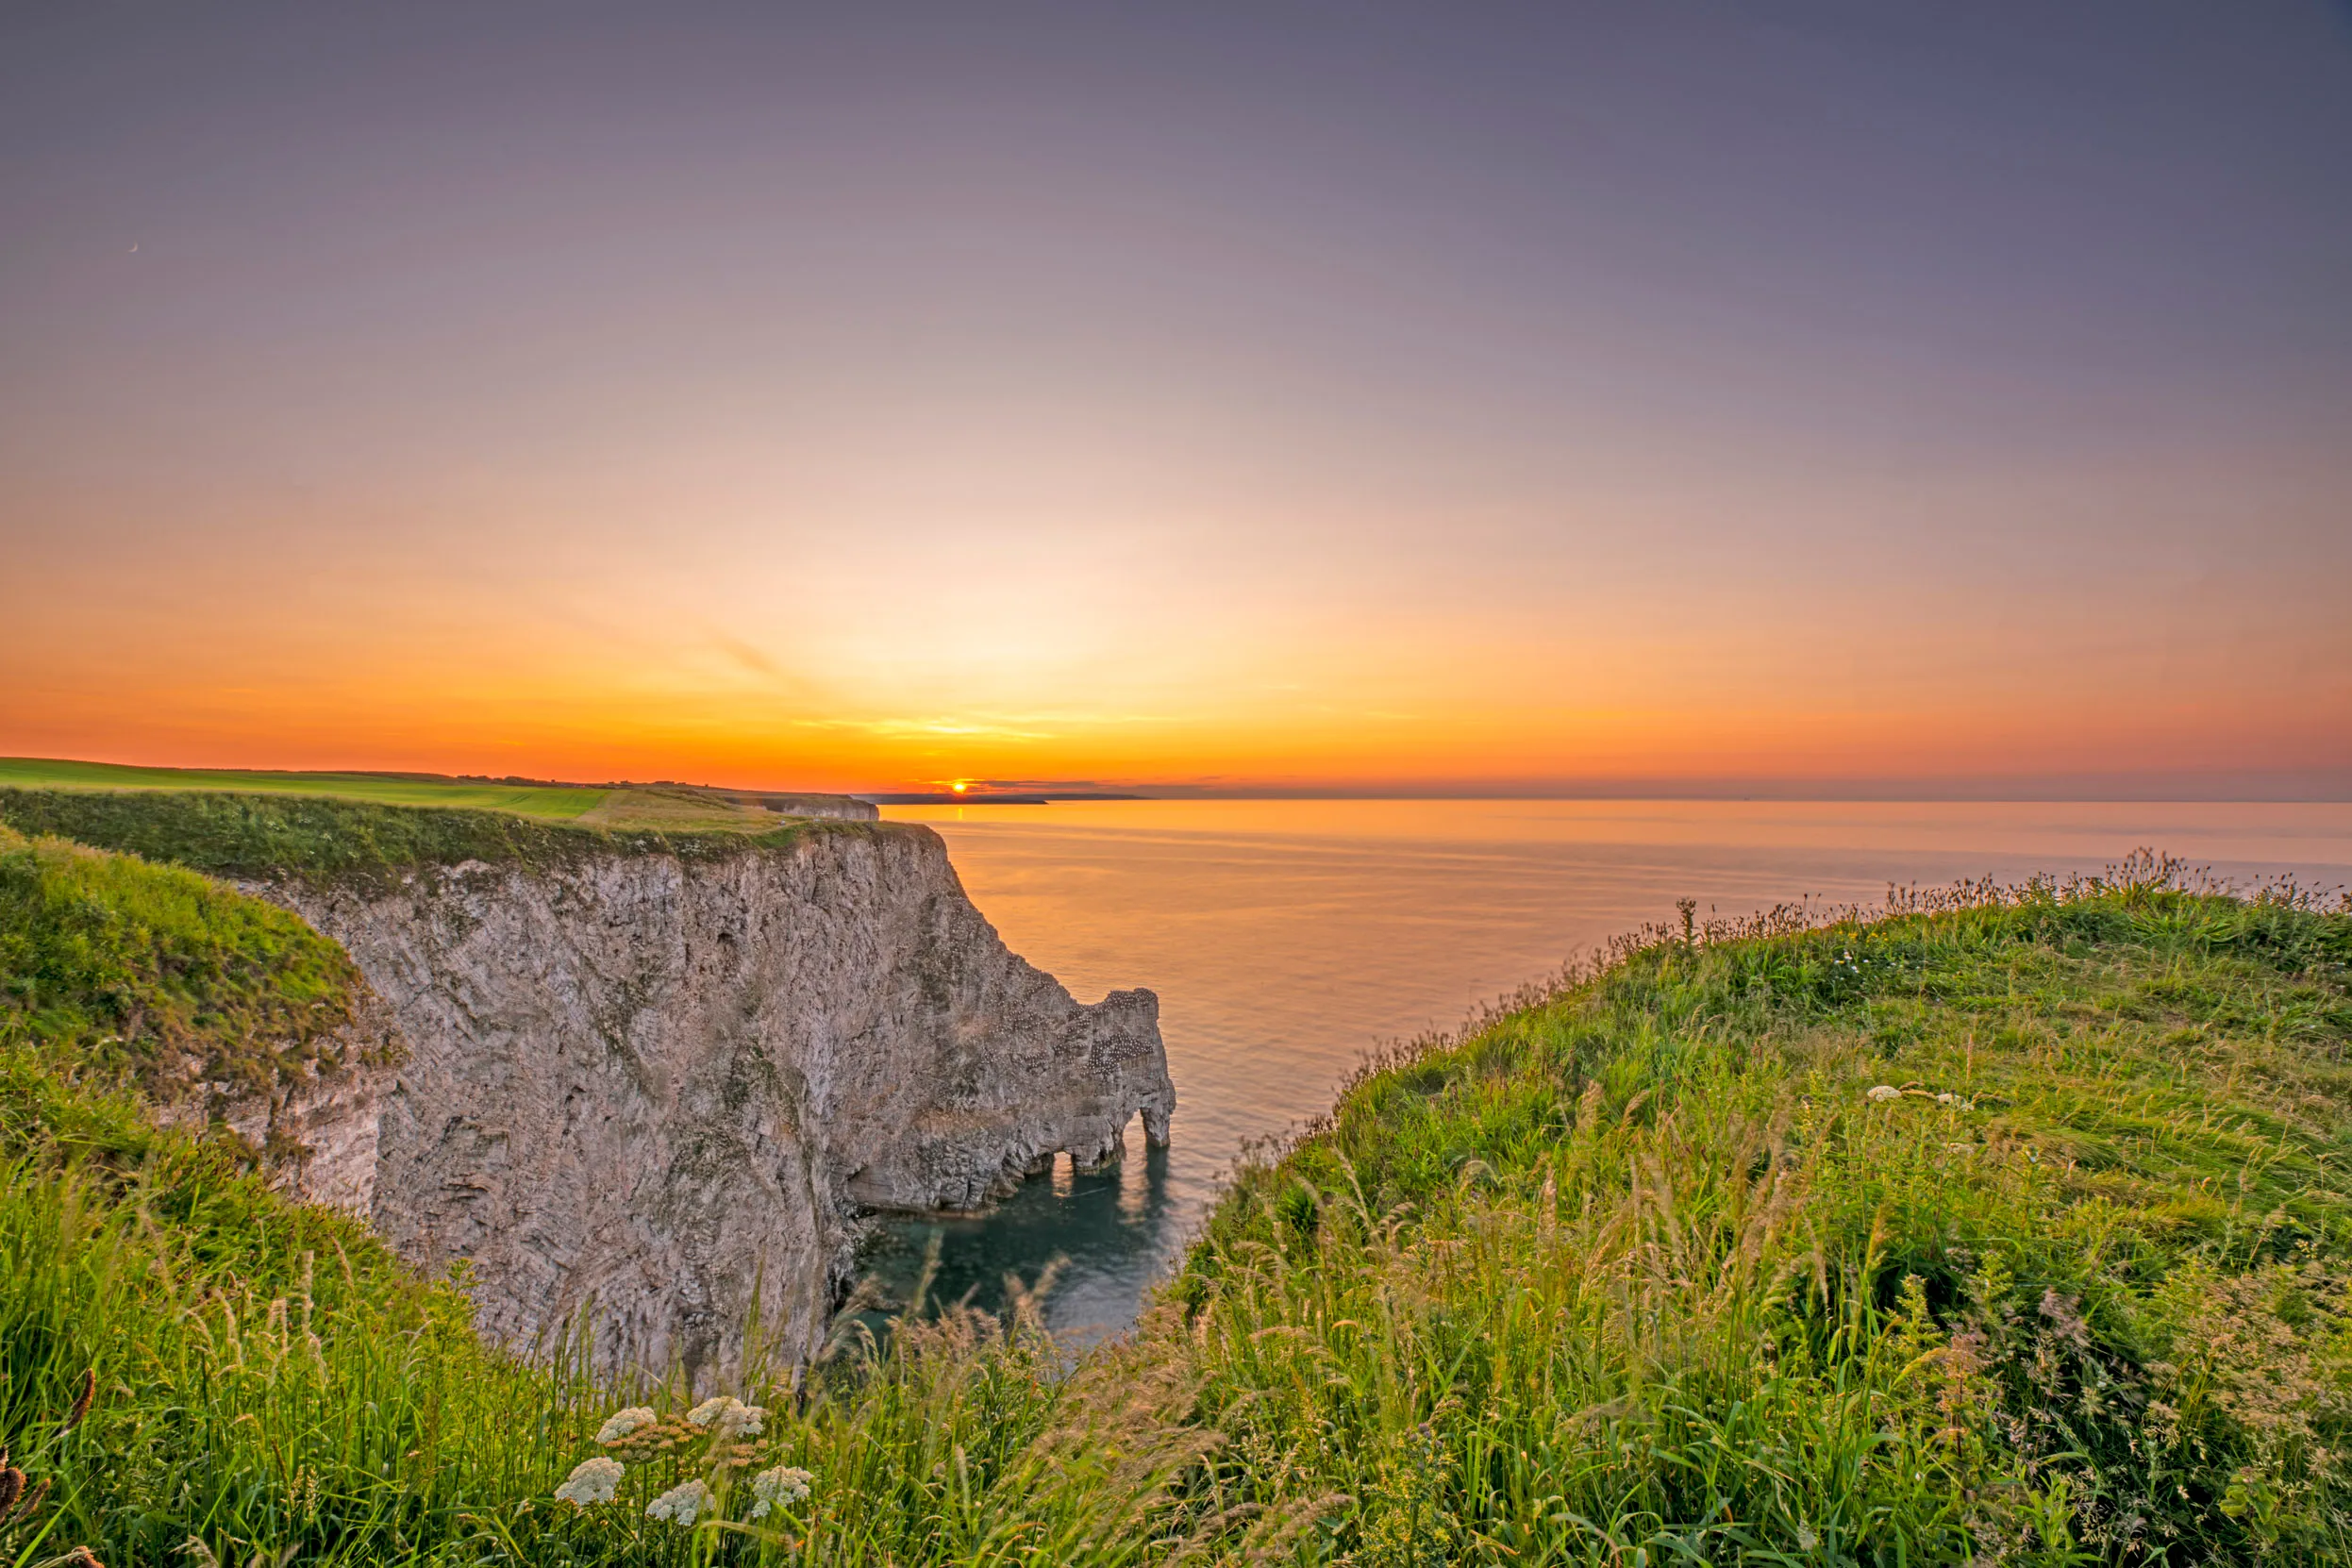 The view of the cliffs at Bempton overlooking the water at sunset, showing surrounding grassland and the arch rock formation in the cliffs.